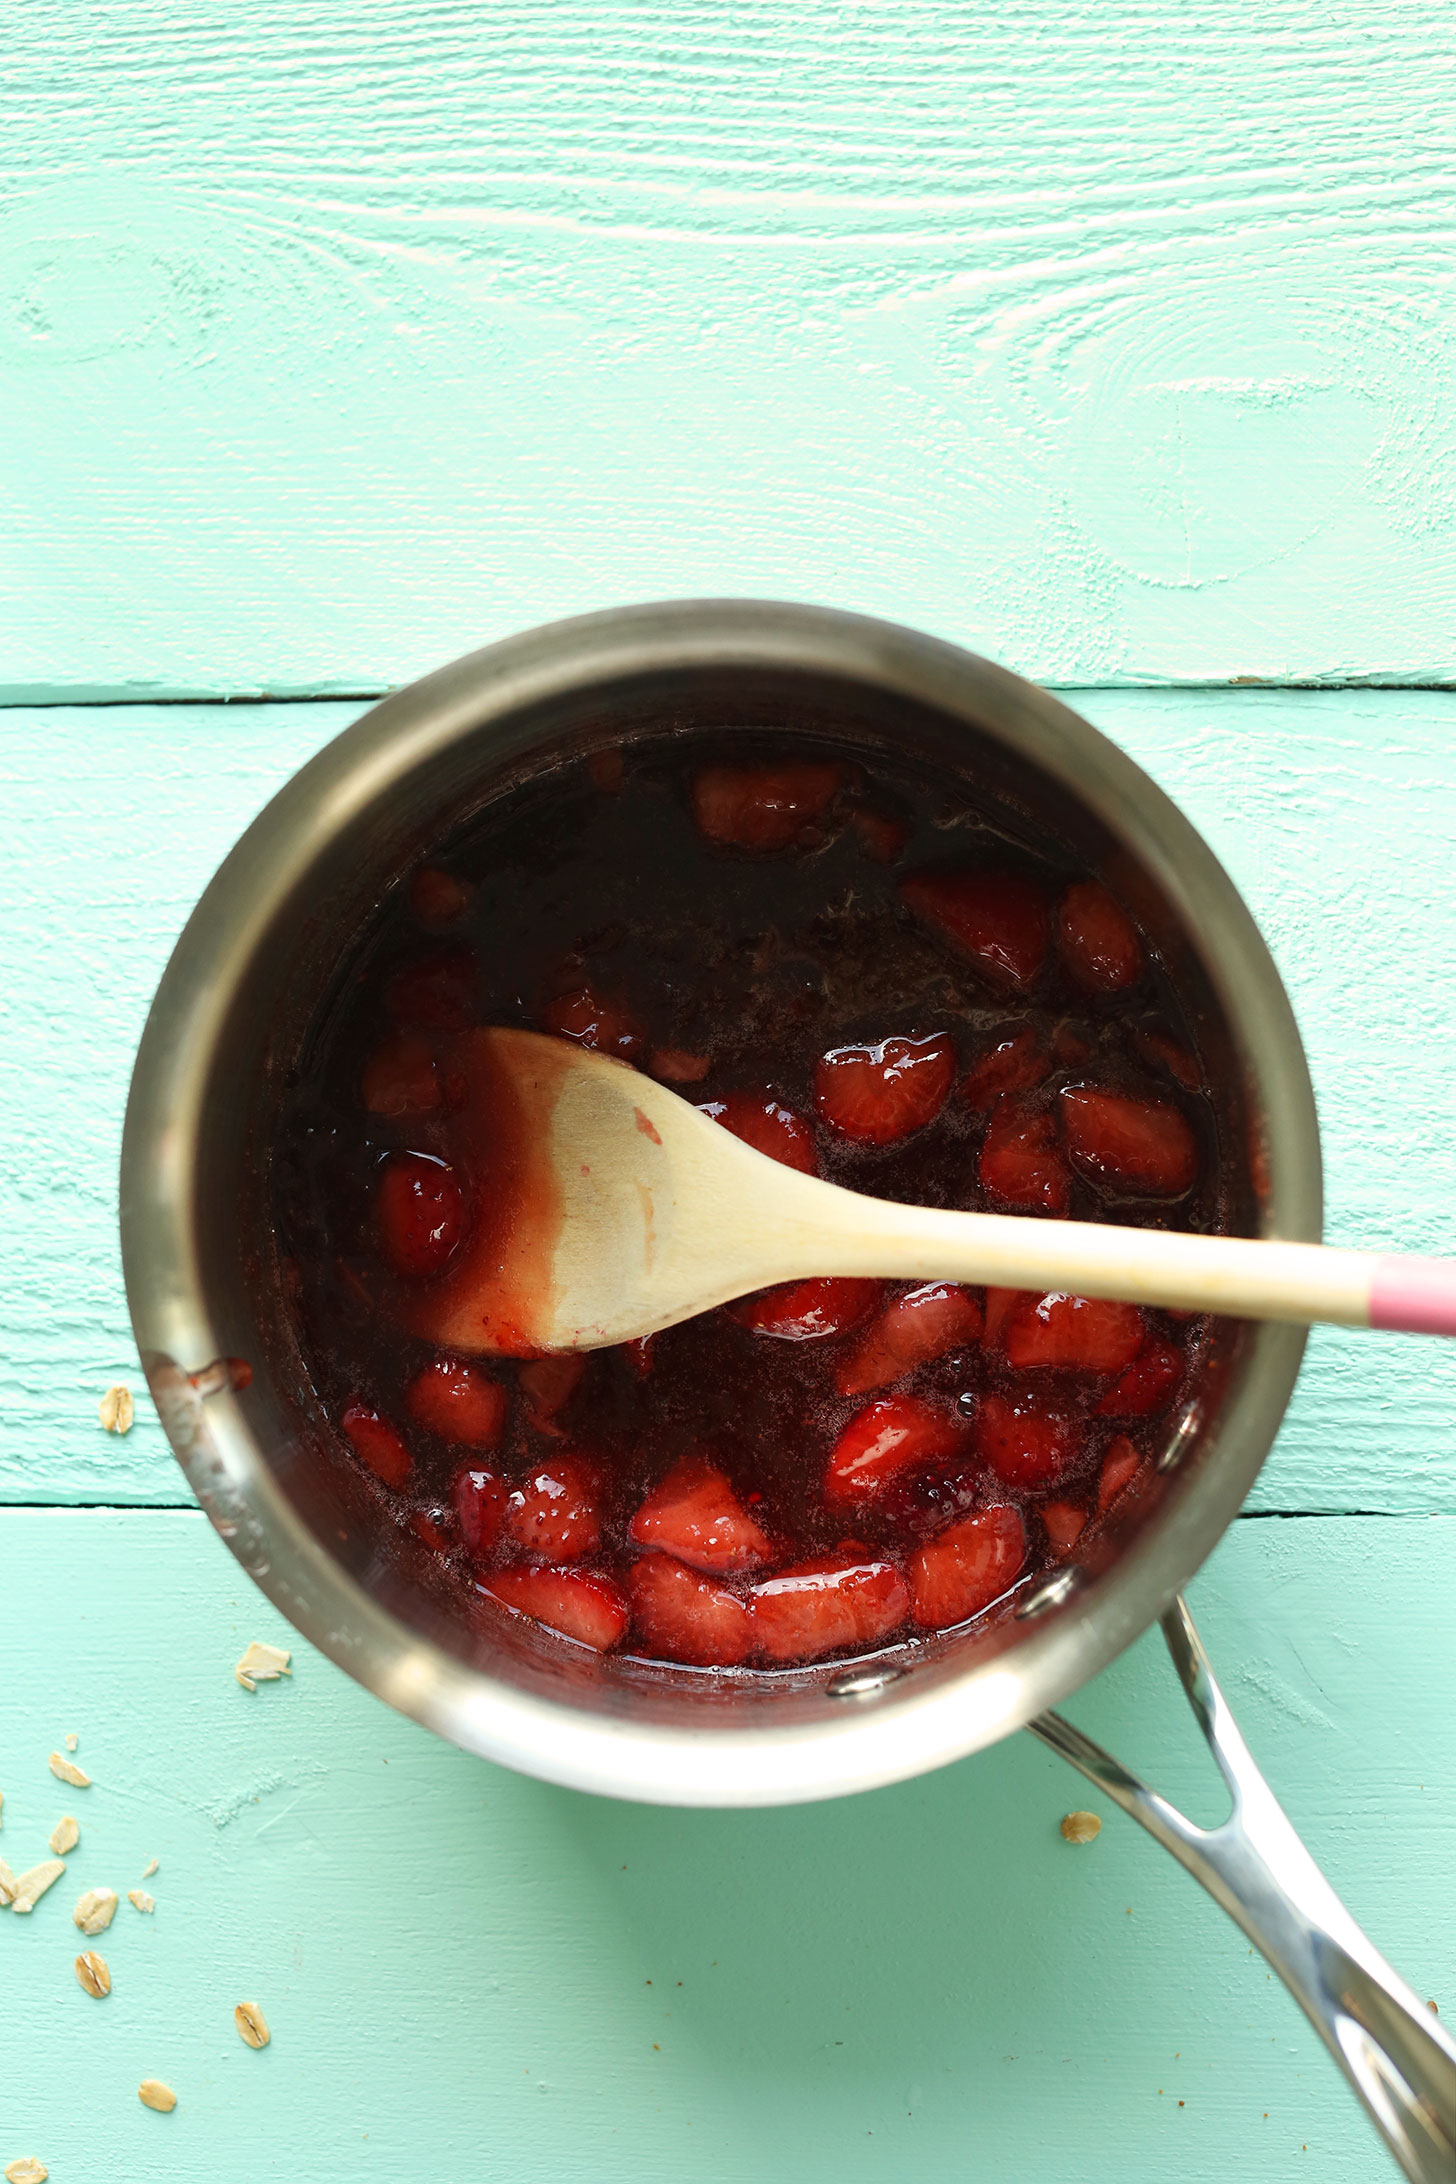 Cooking strawberries and jam in a saucepan